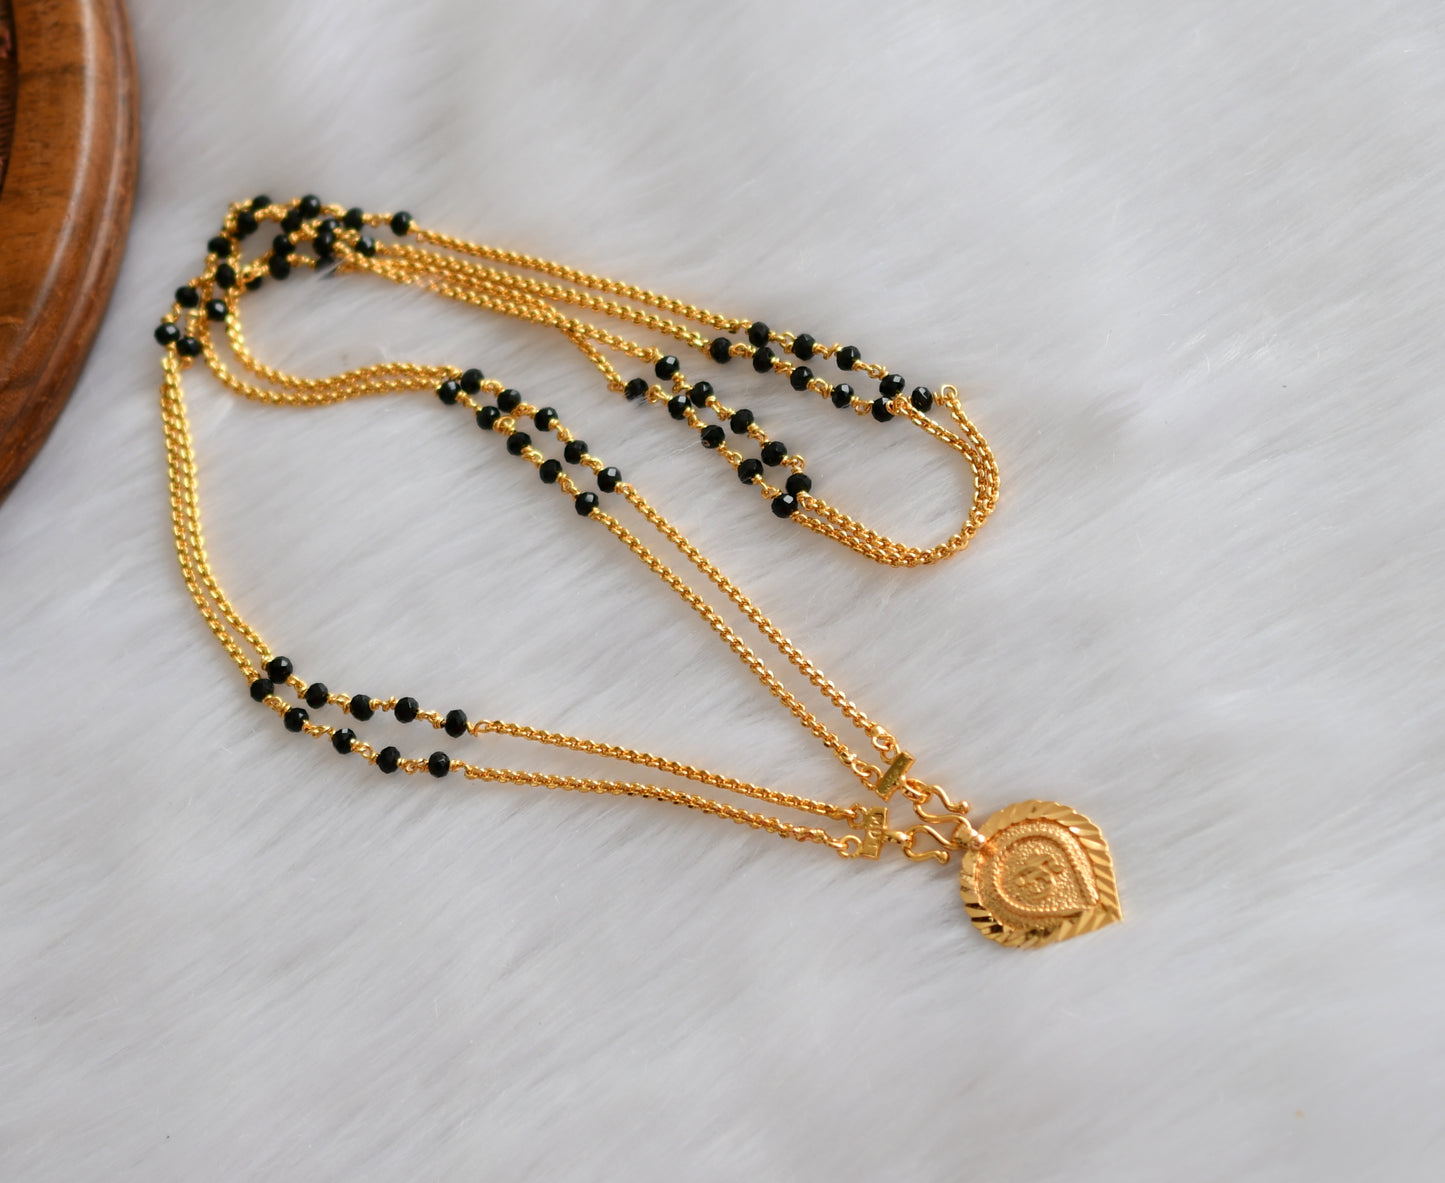 Gold tone 'om' pendant with double layer karimani chain dj-38591